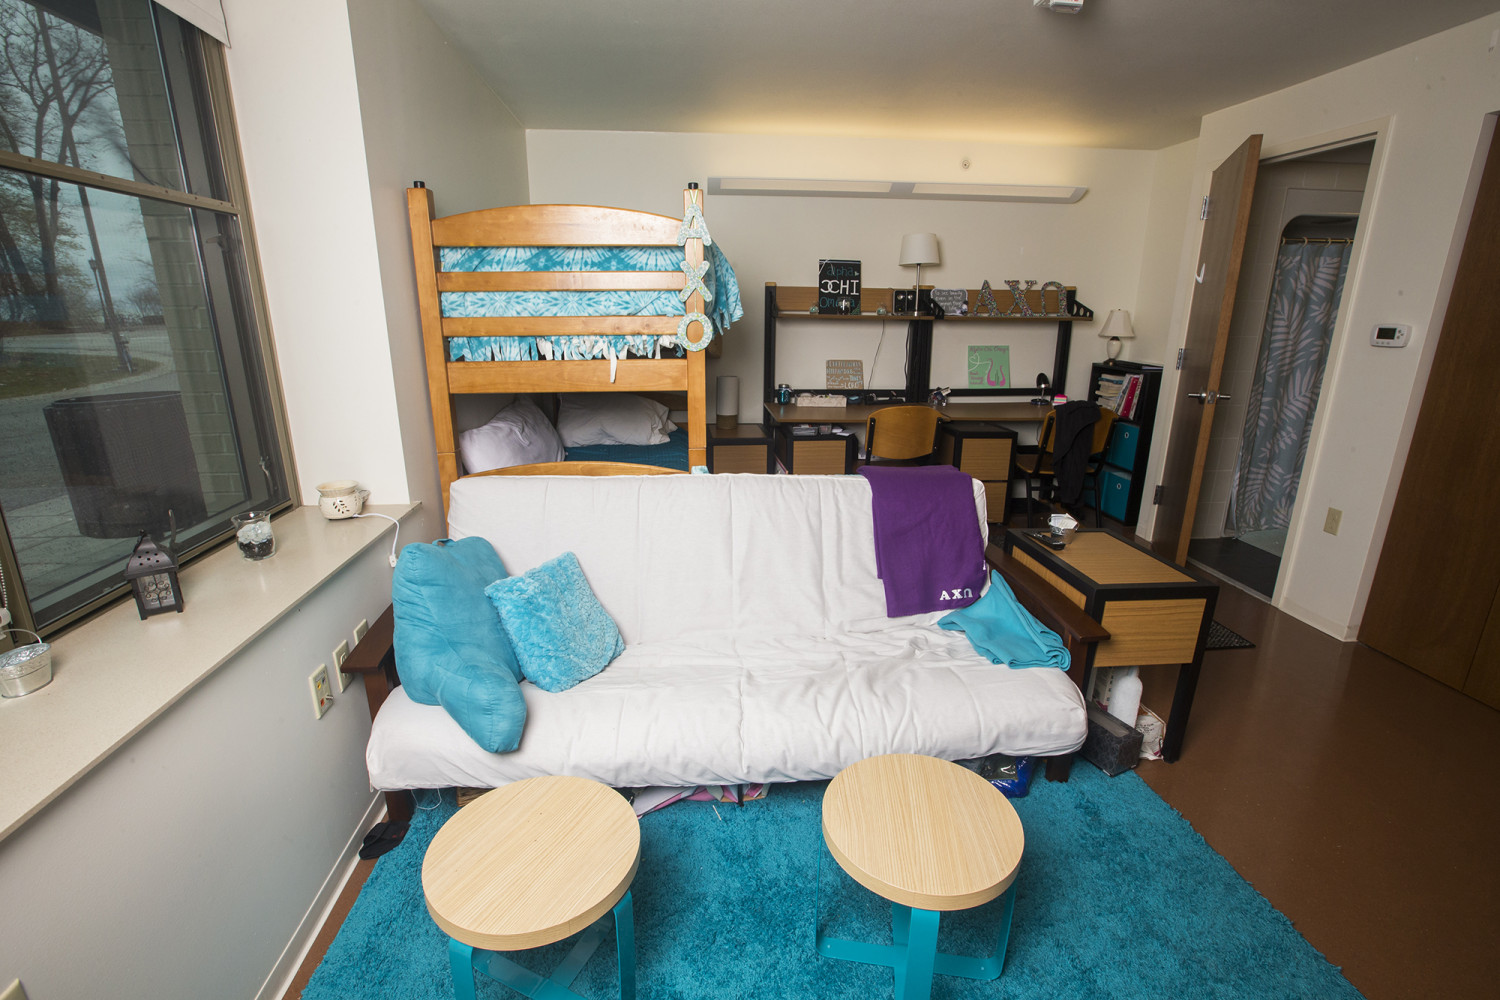 An example double room in the Oaks.